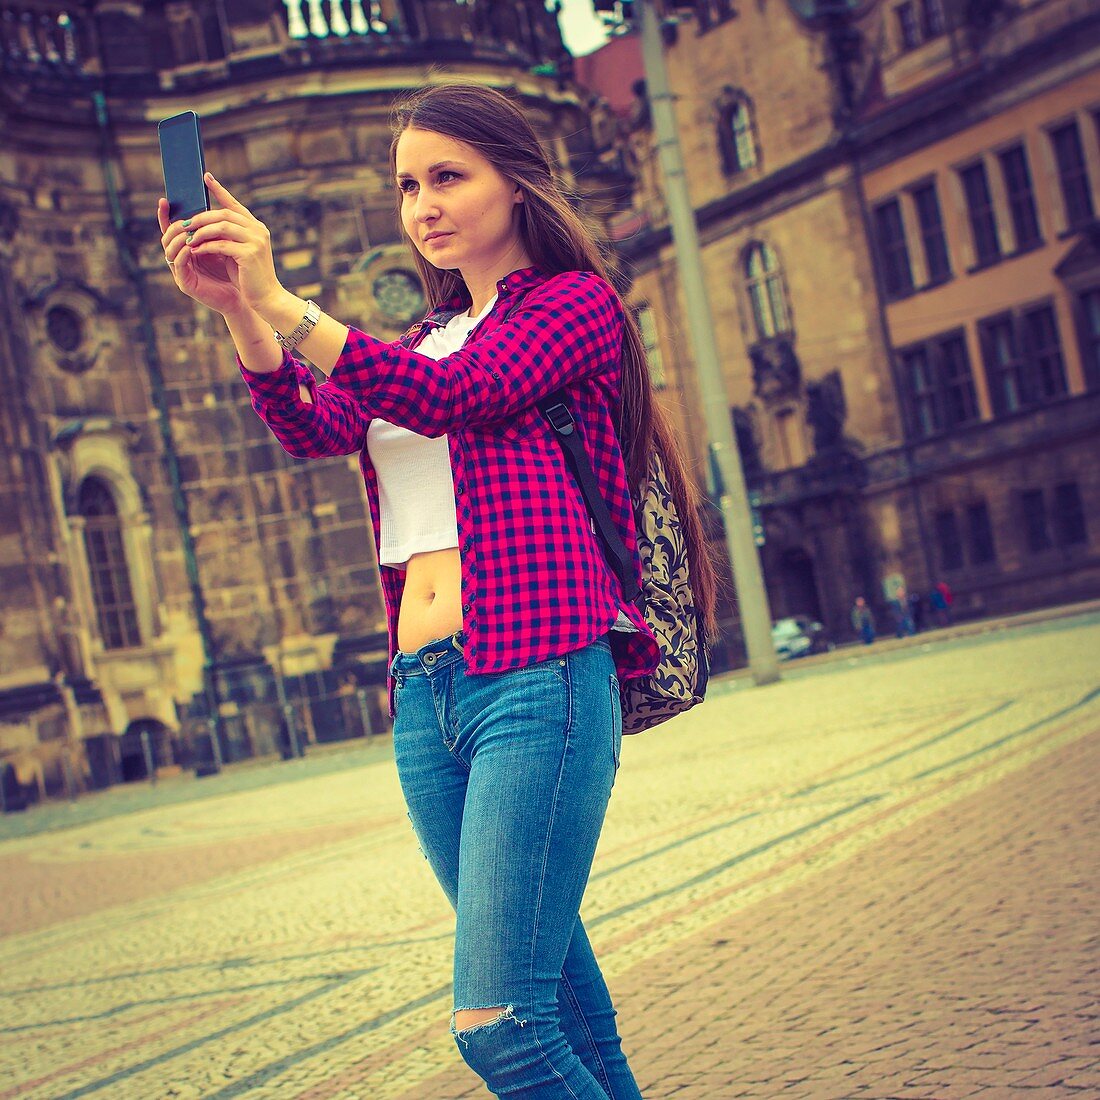 Young woman taking photo of herself